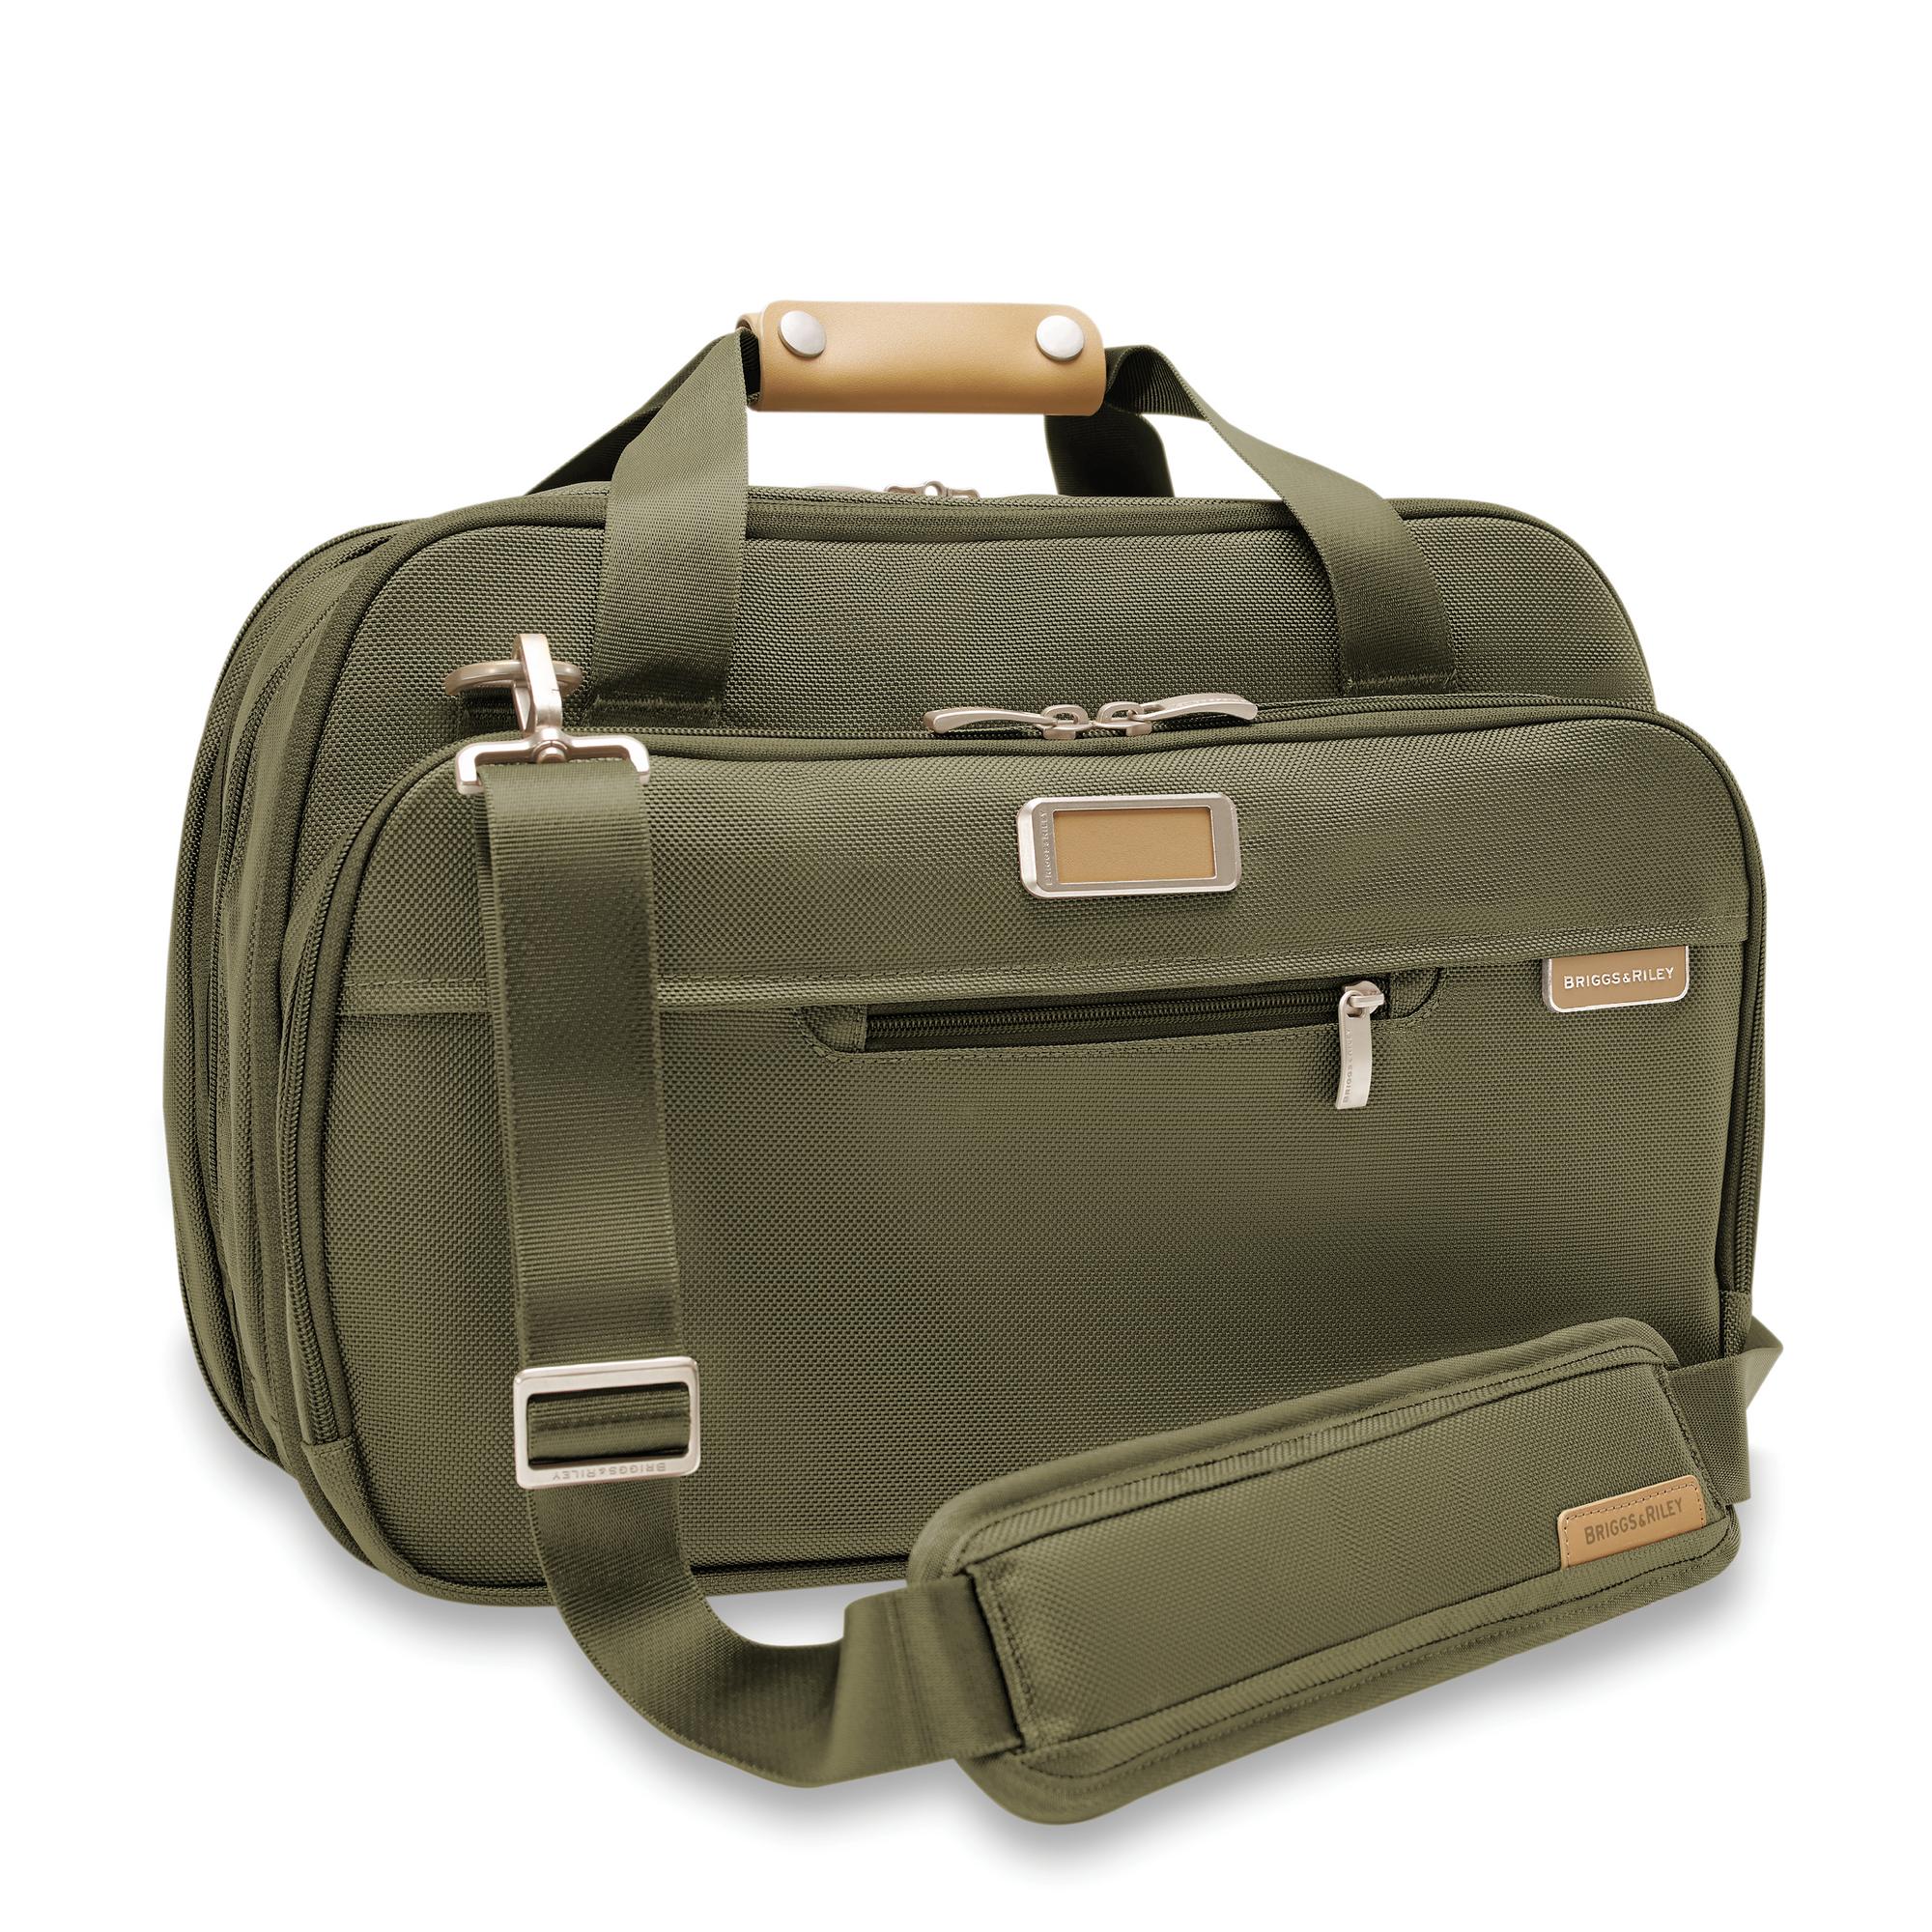 Briggs & Riley Baseline Expandable Cabin Bag – Luggage Pros